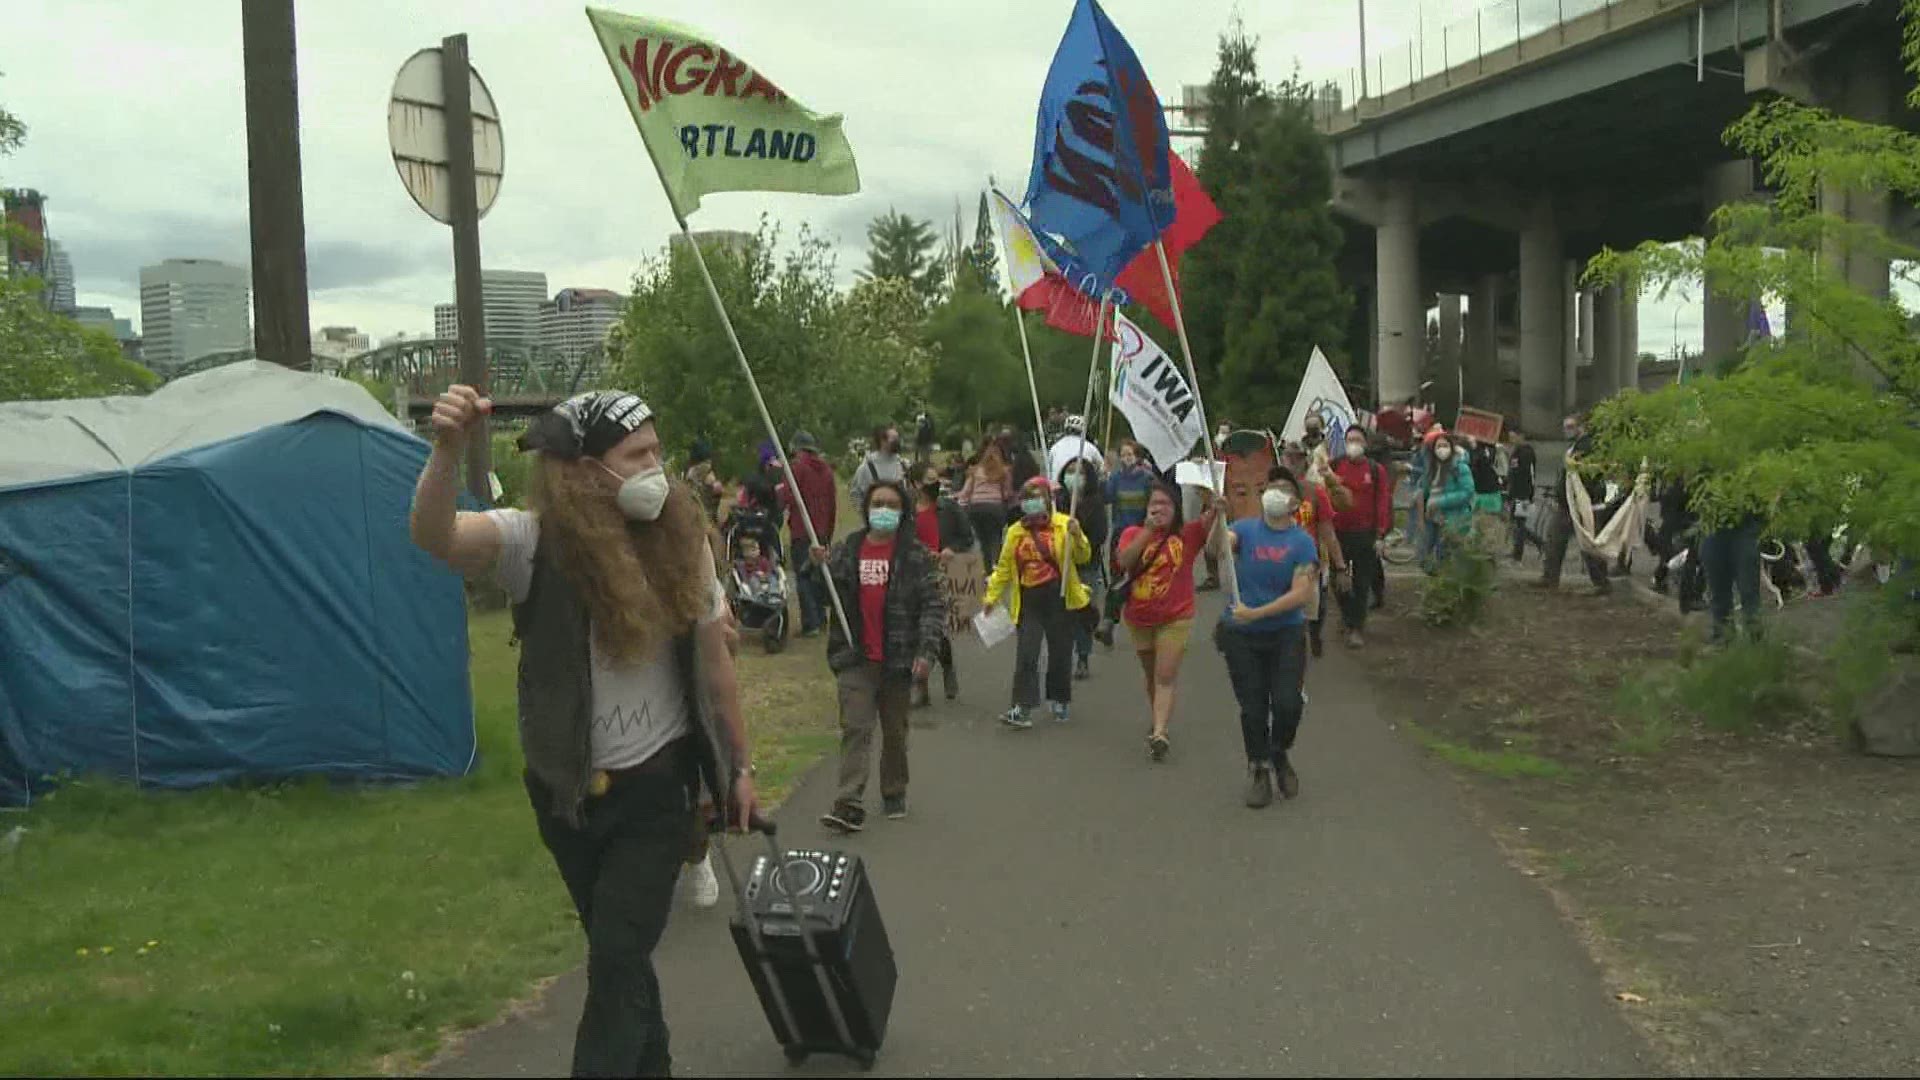 May 1 is International Workers' Day, a traditional day for marches, demonstrations and rallies in the Portland area.